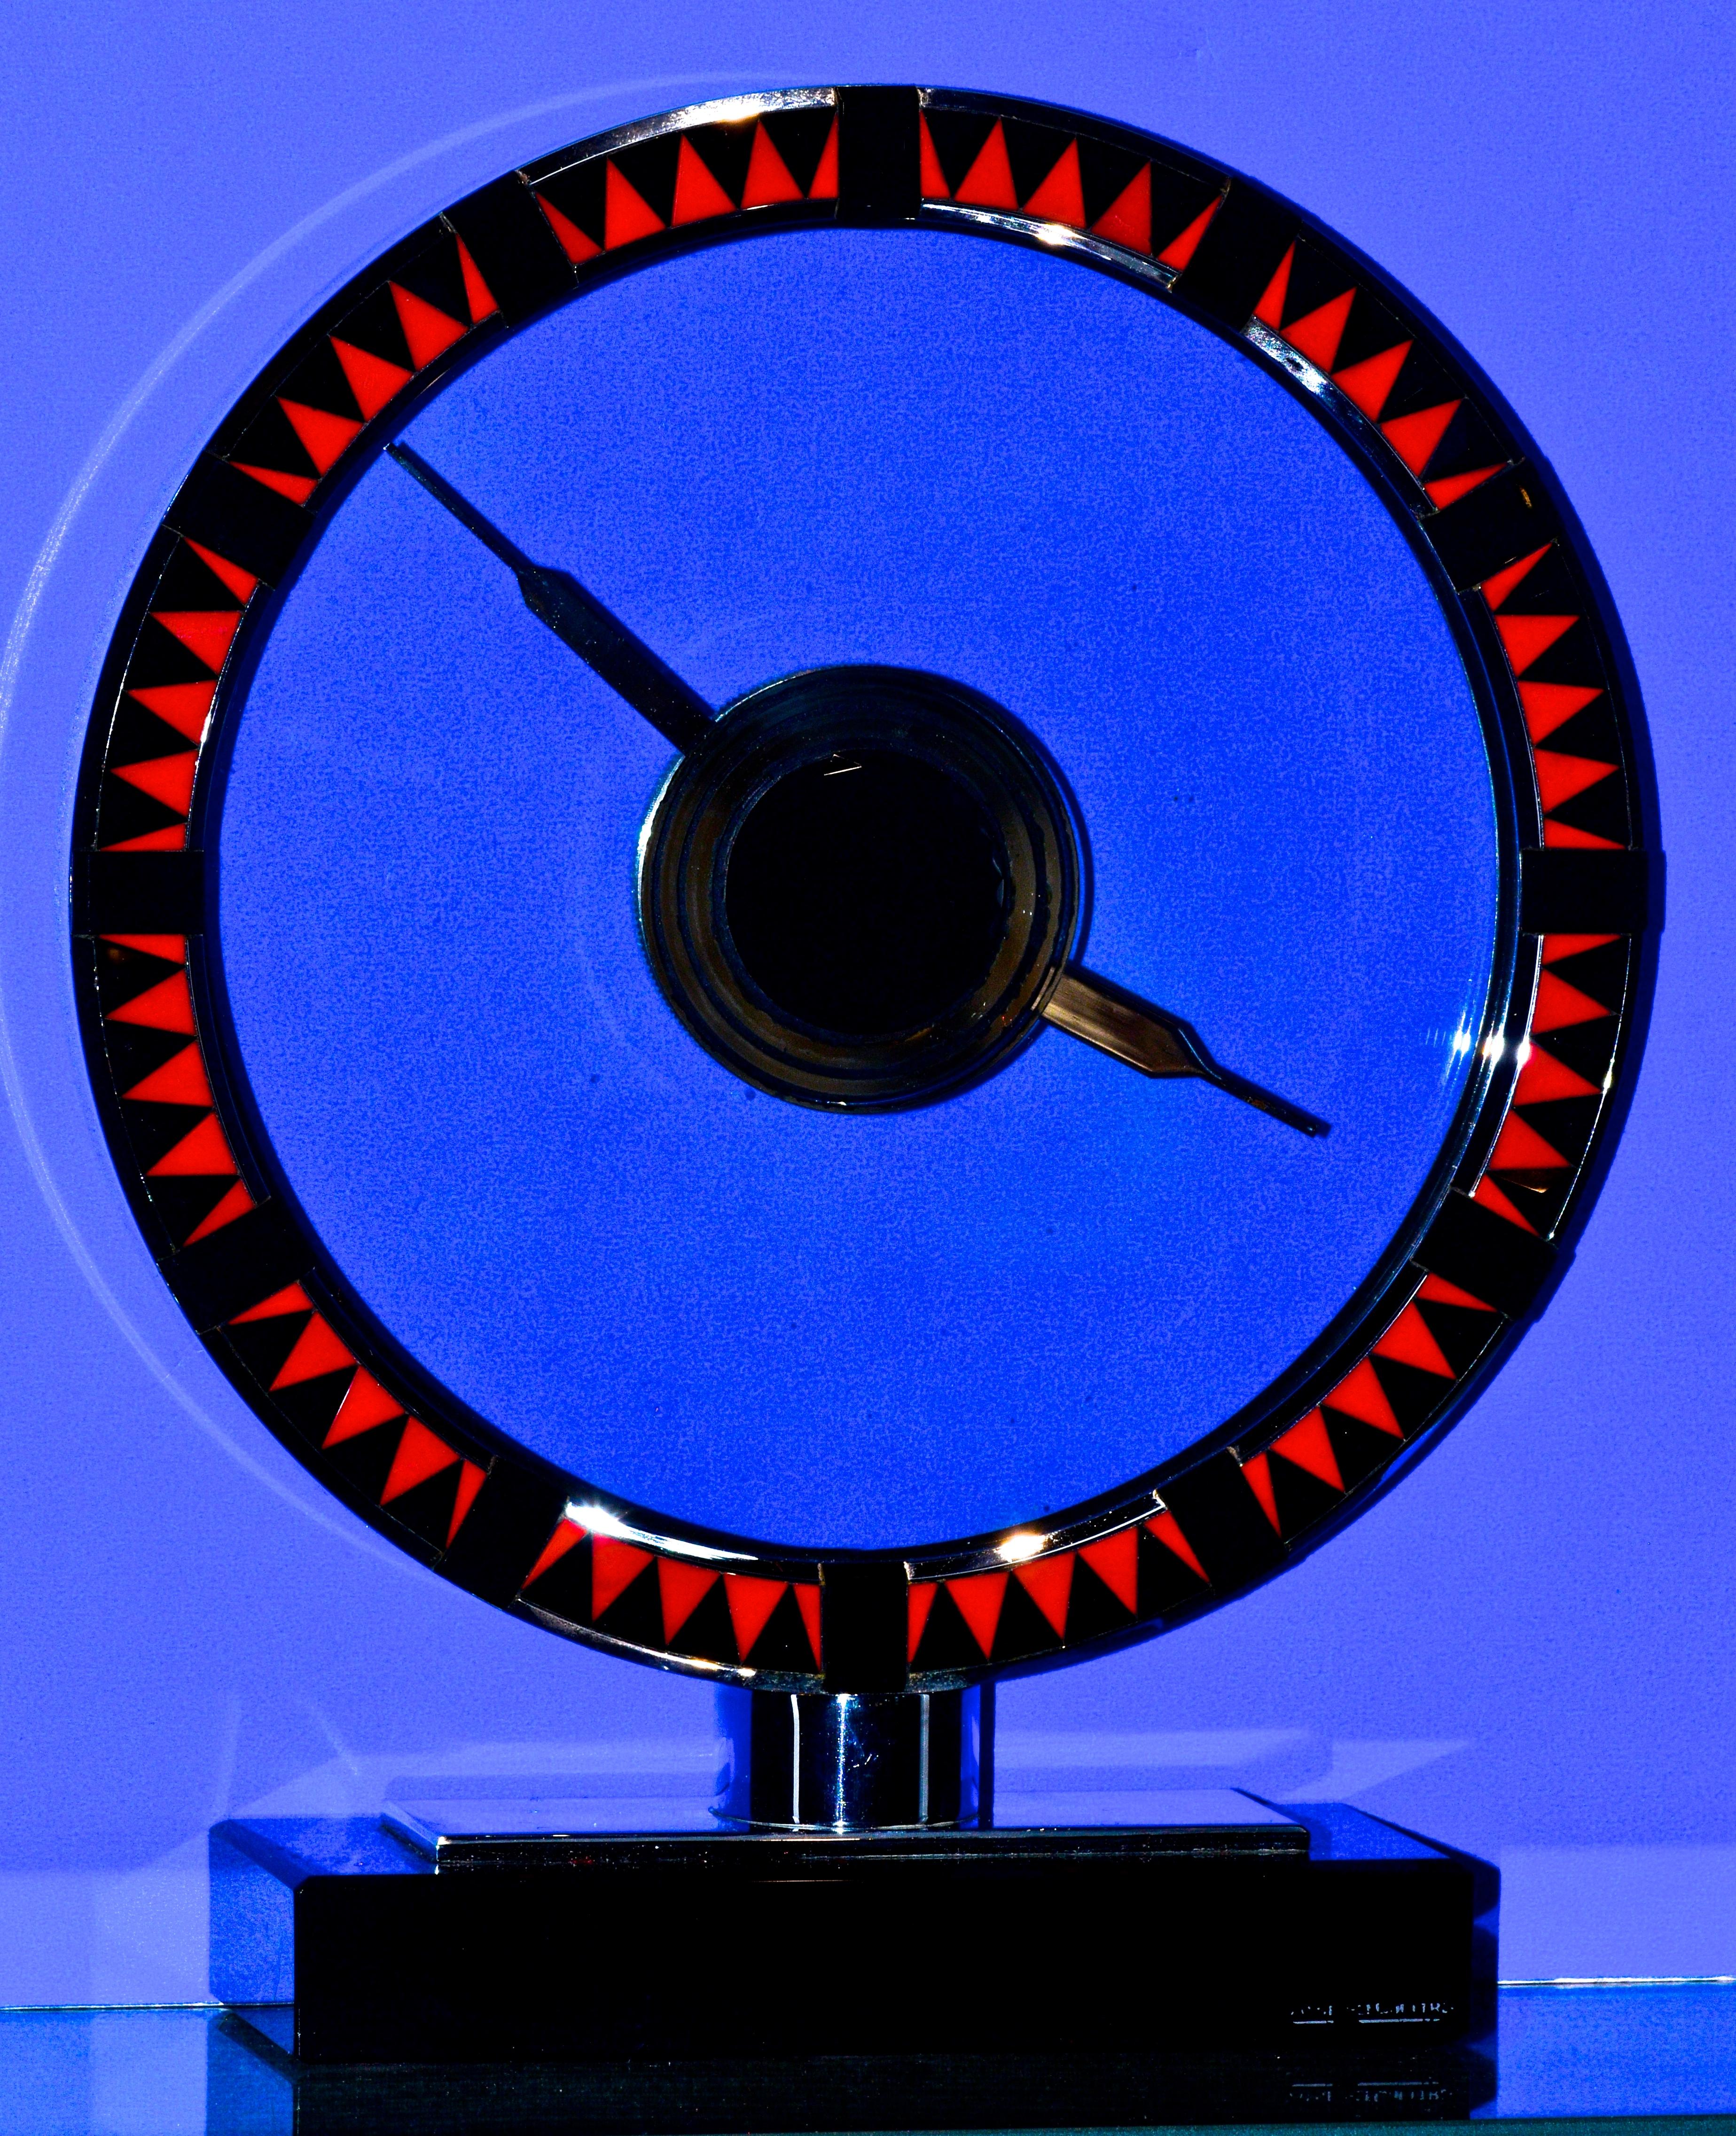 Jaeger LeCoultre Art Deco clock measuring 8 5/8th by 7 1/8th inches, this is likely a one and only example of an Art Deco clock in polished stainless steel, with faceted pyramidal triangular onyx alternating with vivid red (not orange), triangular